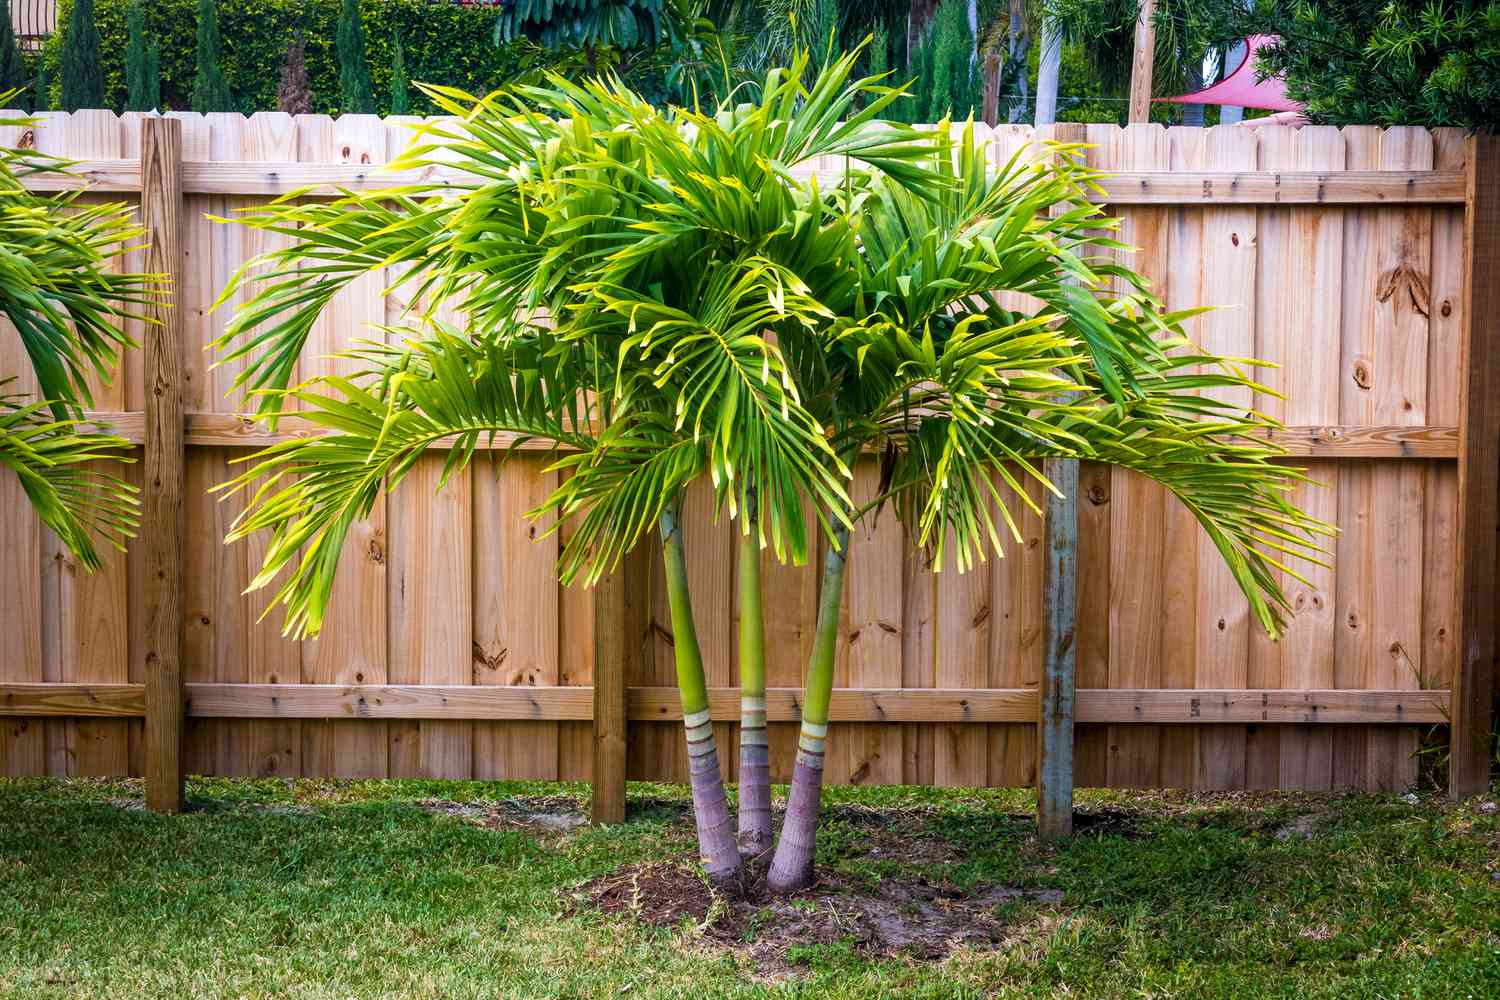 Spindle palm trees